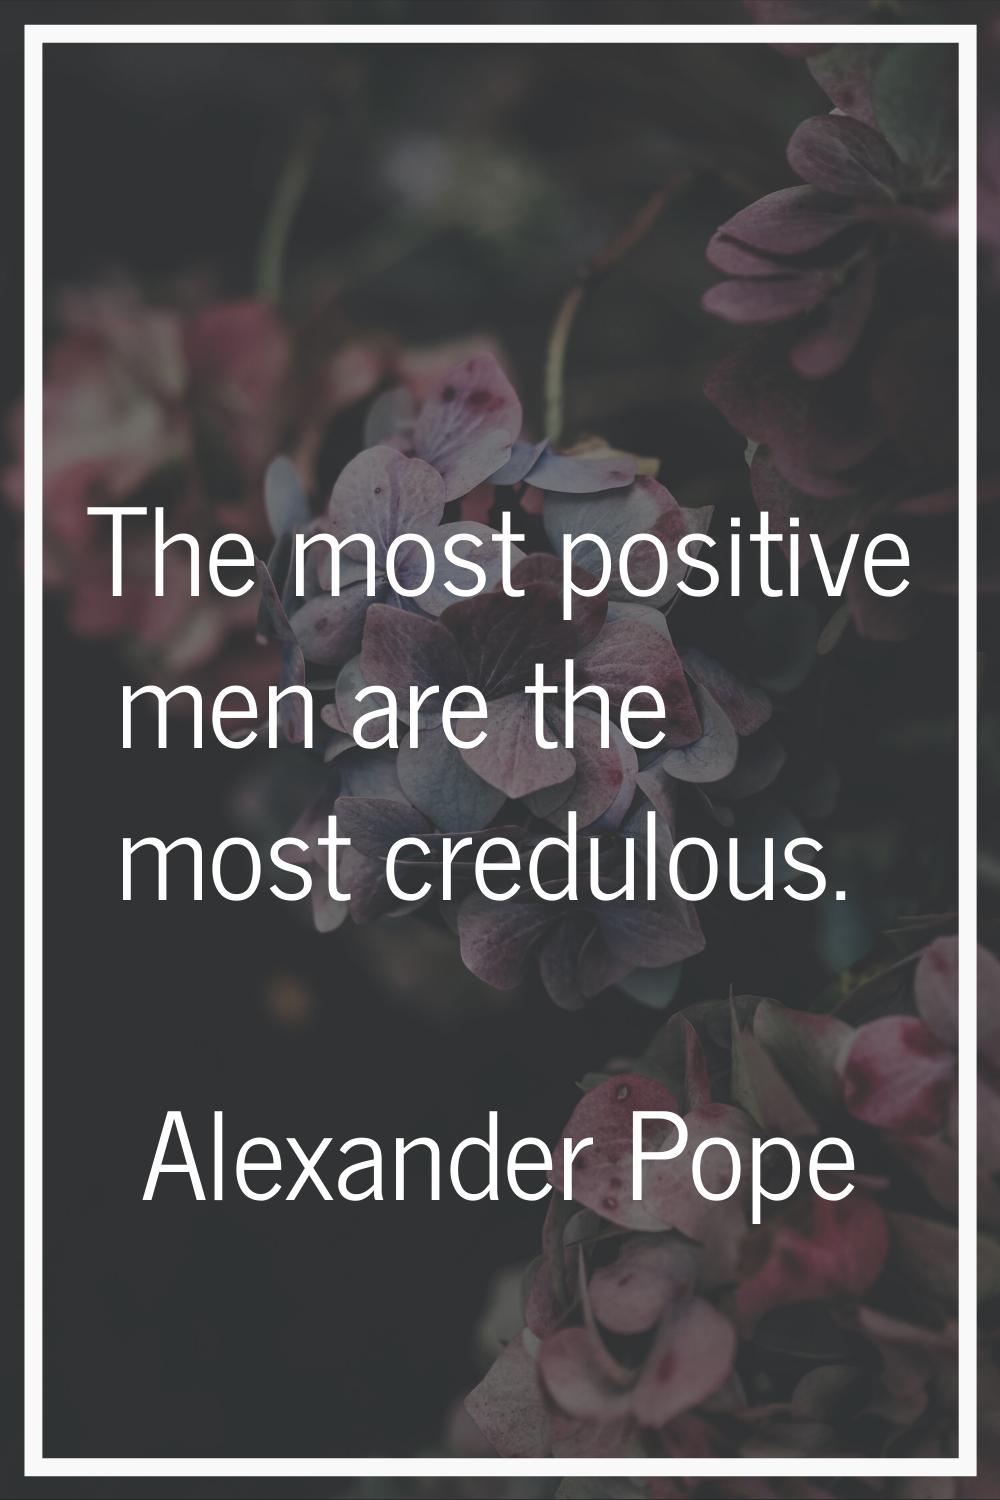 The most positive men are the most credulous.